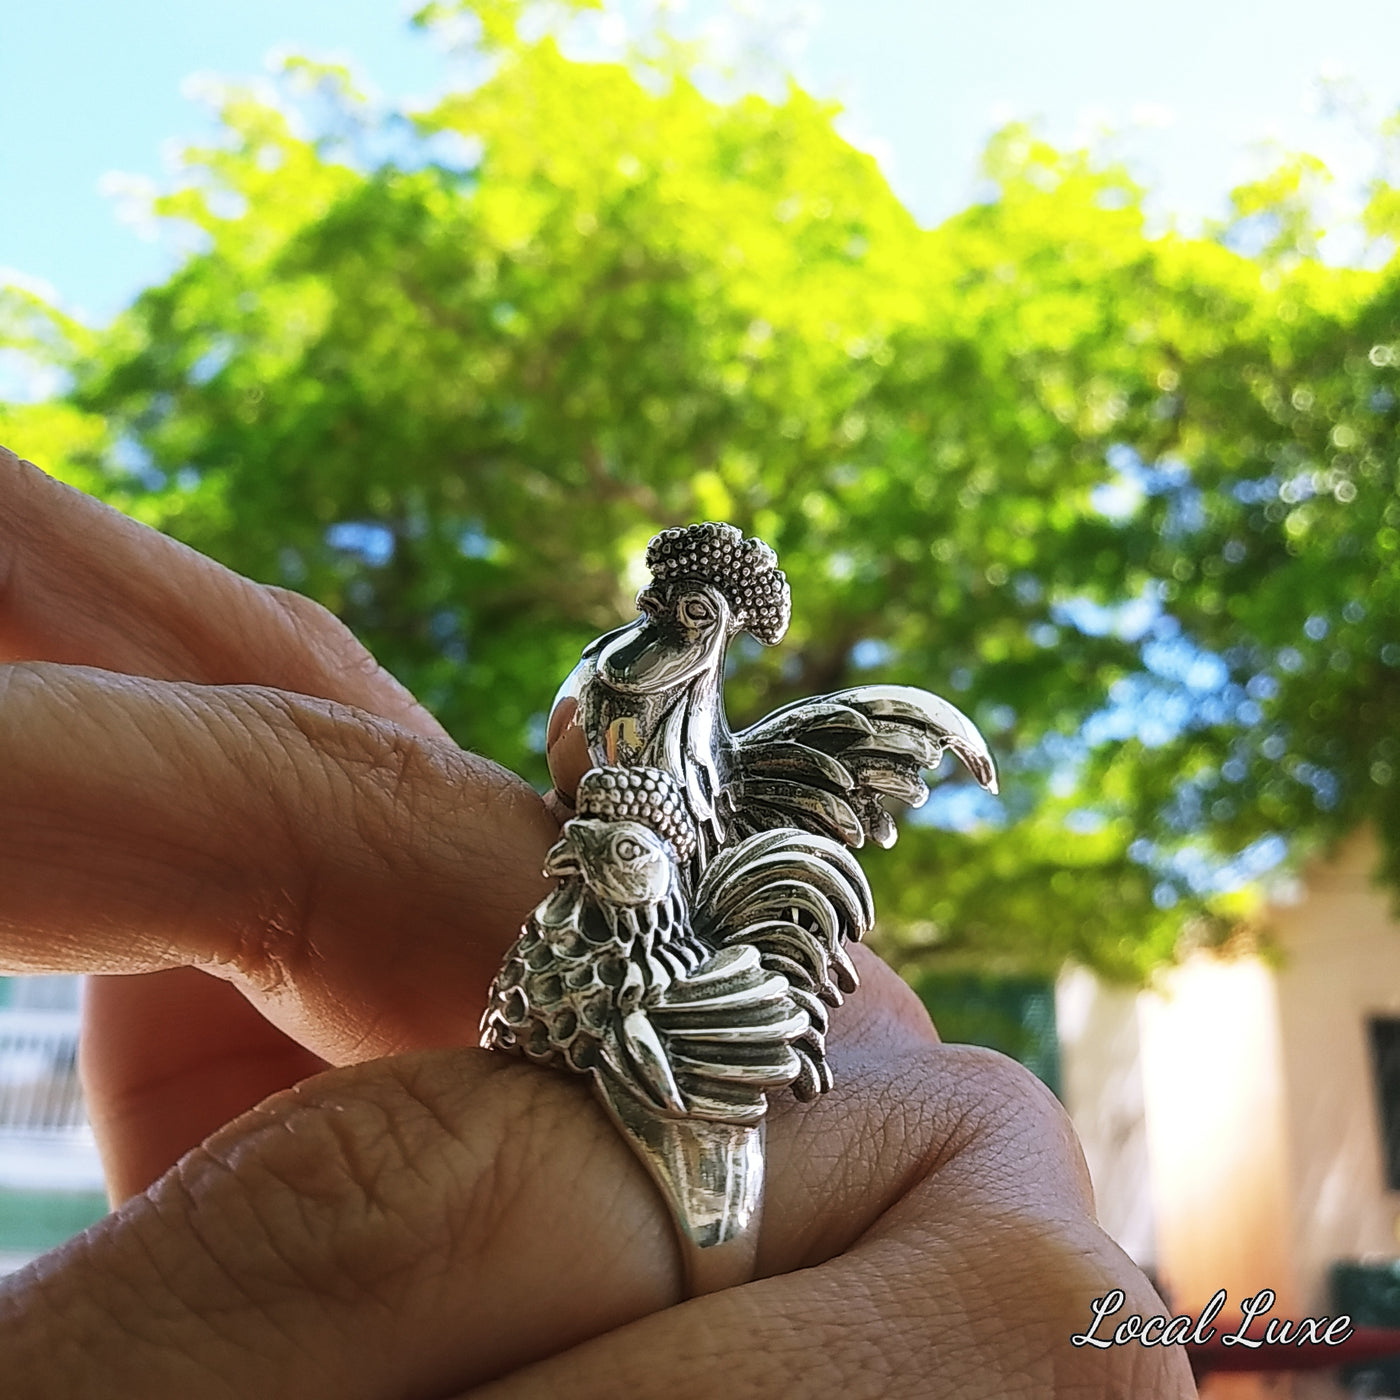 "Key West Cock Ring" - 'Style #1' "The Big Boy" OR 'Style #2' "Above Average" Sterling Silver